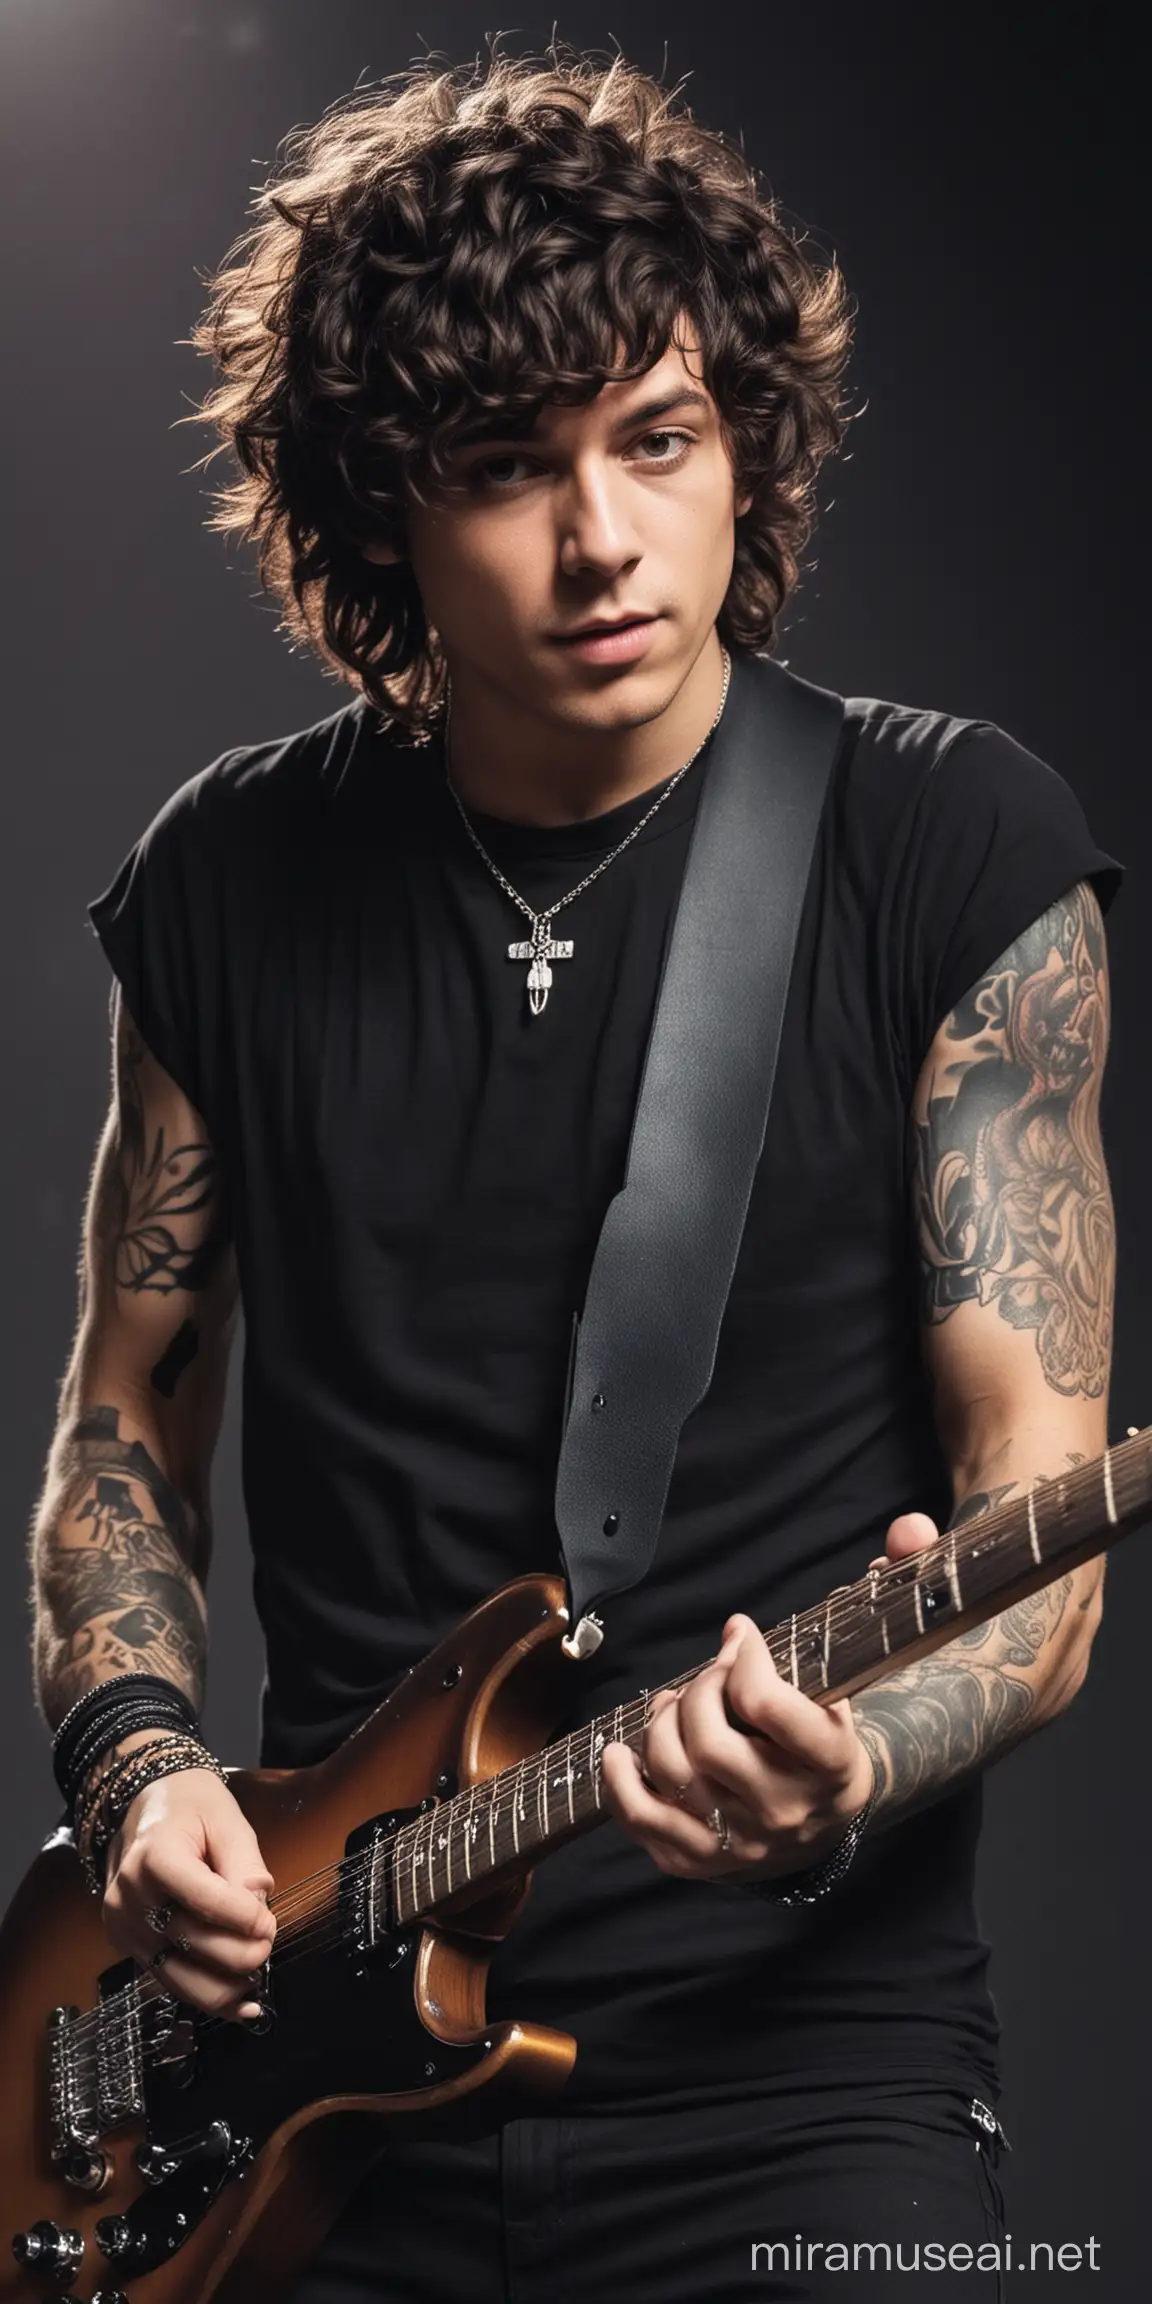 A rock band front man, he had dark curly hair, he plays guitar, he looks like a combination of Harry Styles and Oli Sykes 